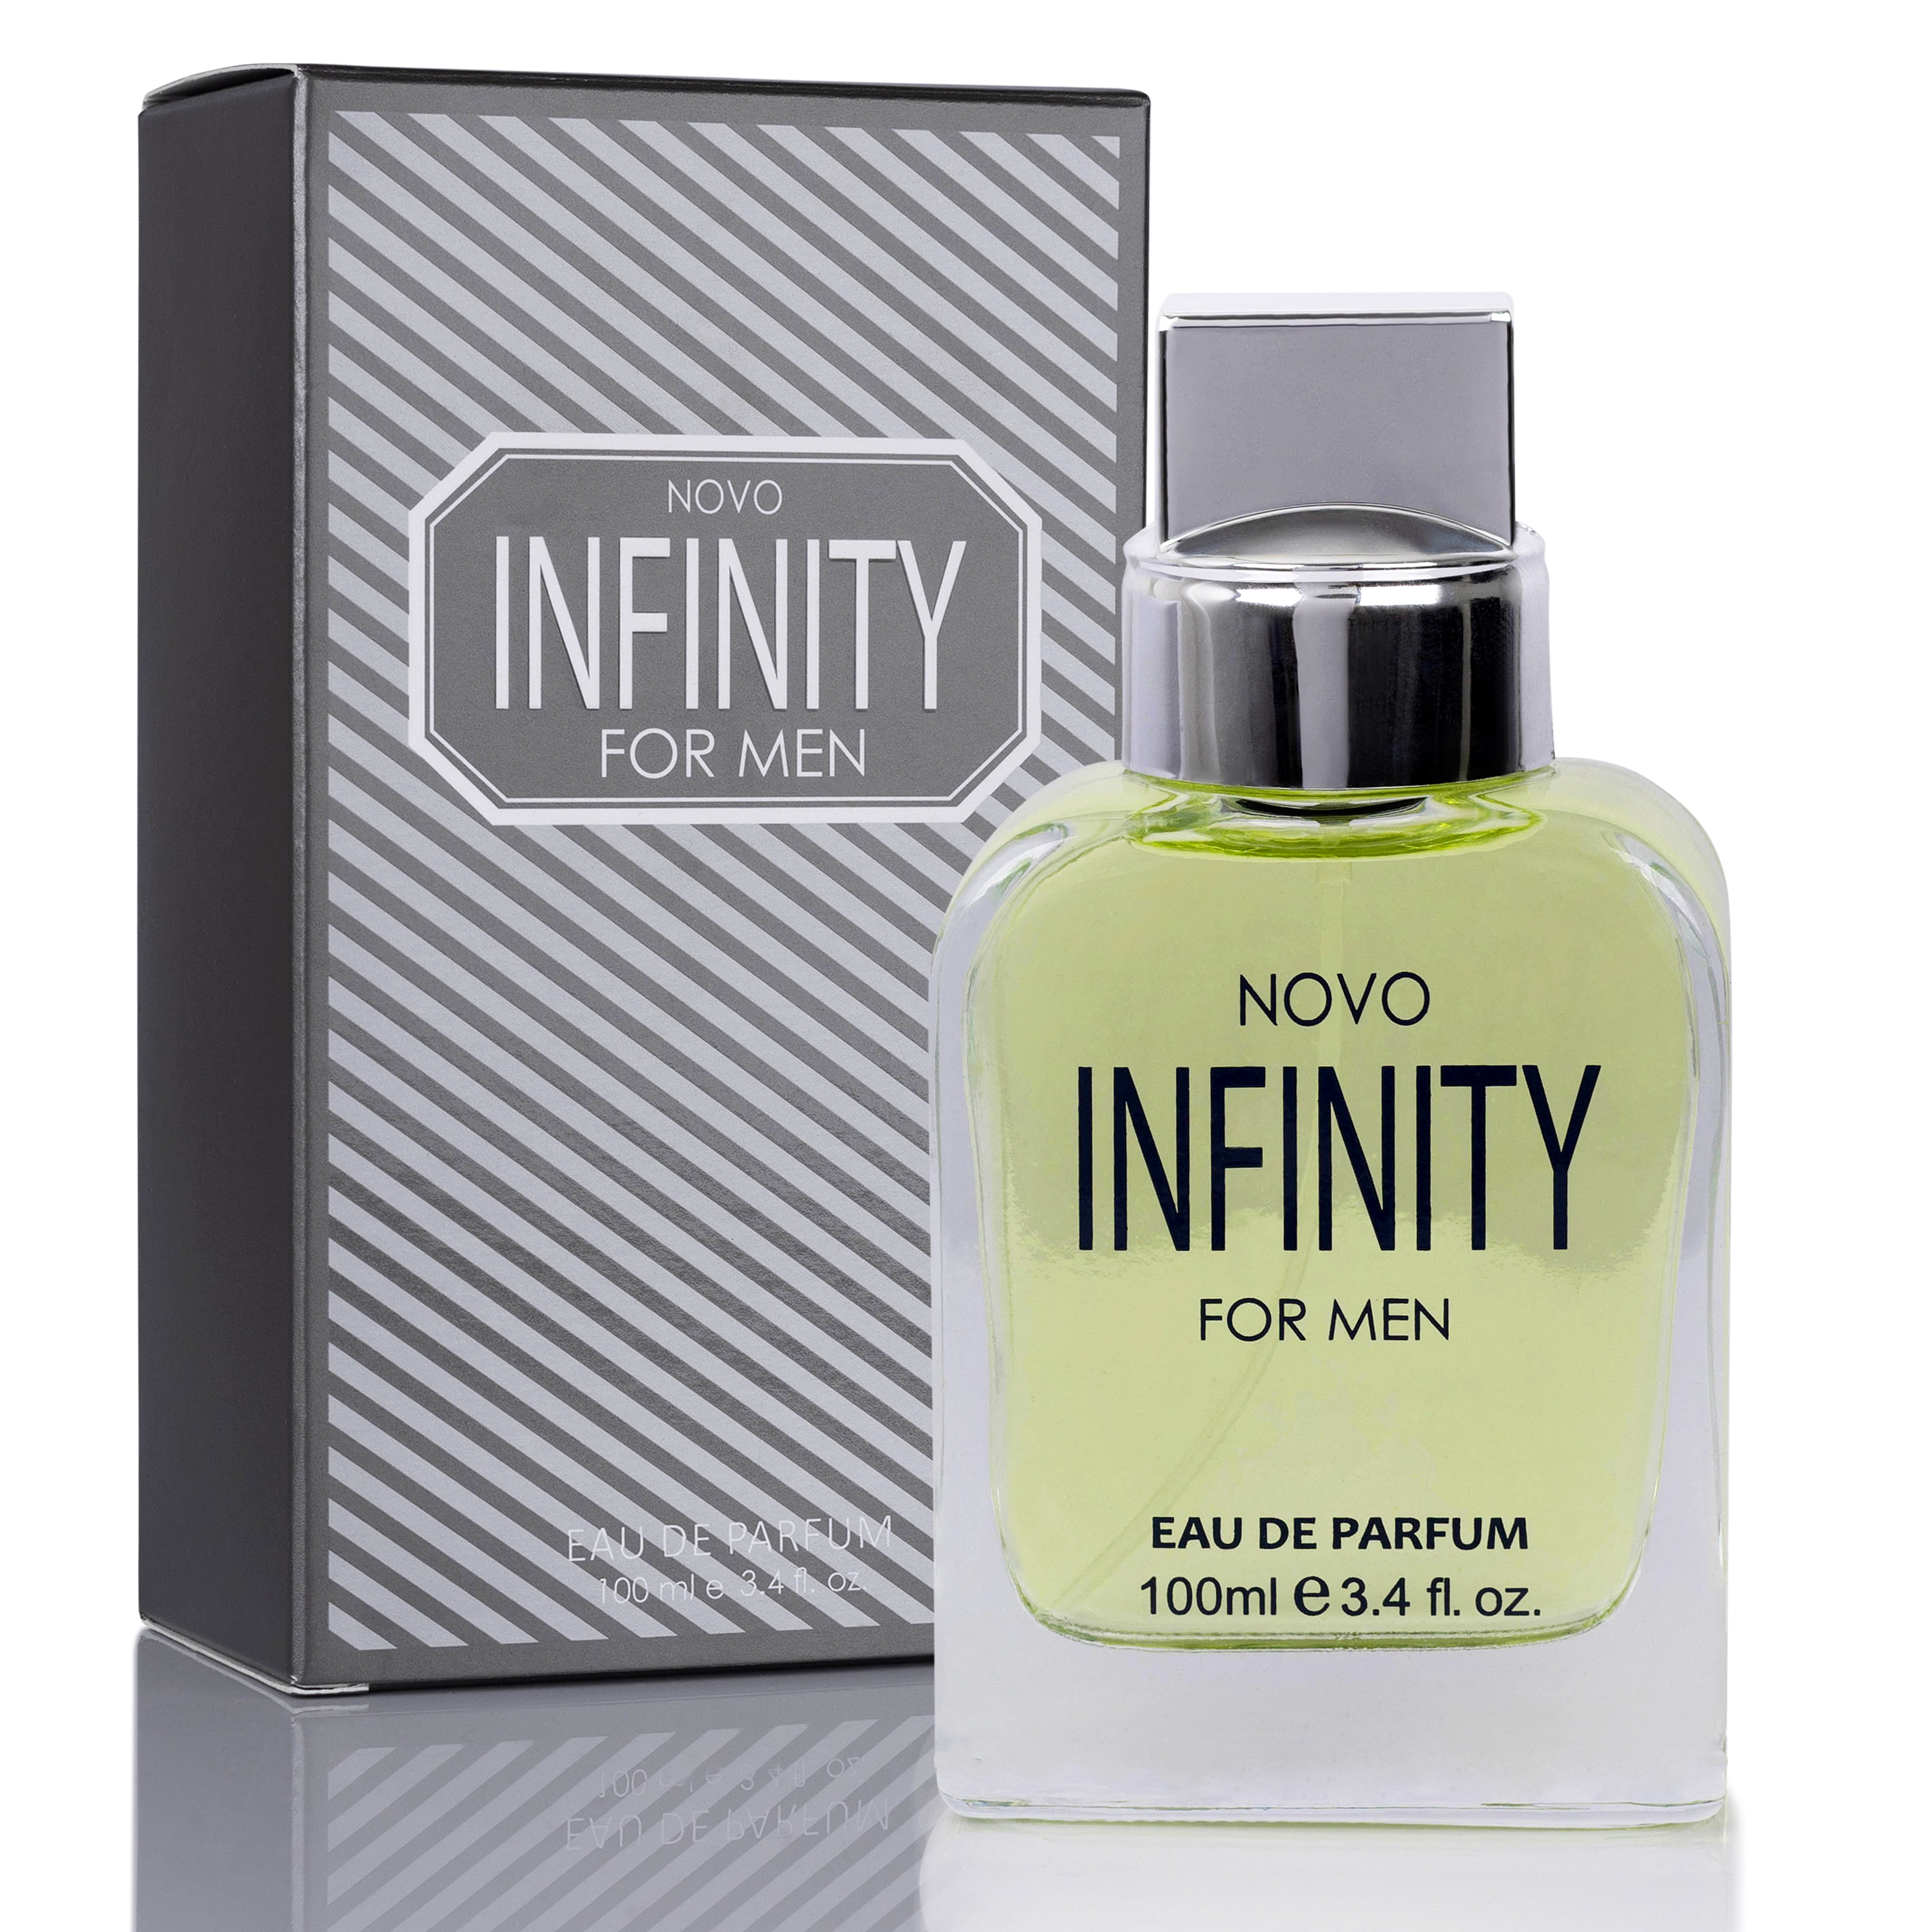 Novo Infinity for Men - 3.4 Fluid Ounce Eau De Parfum Spray for - Citrusy & Floral Top Notes with Subtle Woody Undertones Smell Fresh All Day Long Gift